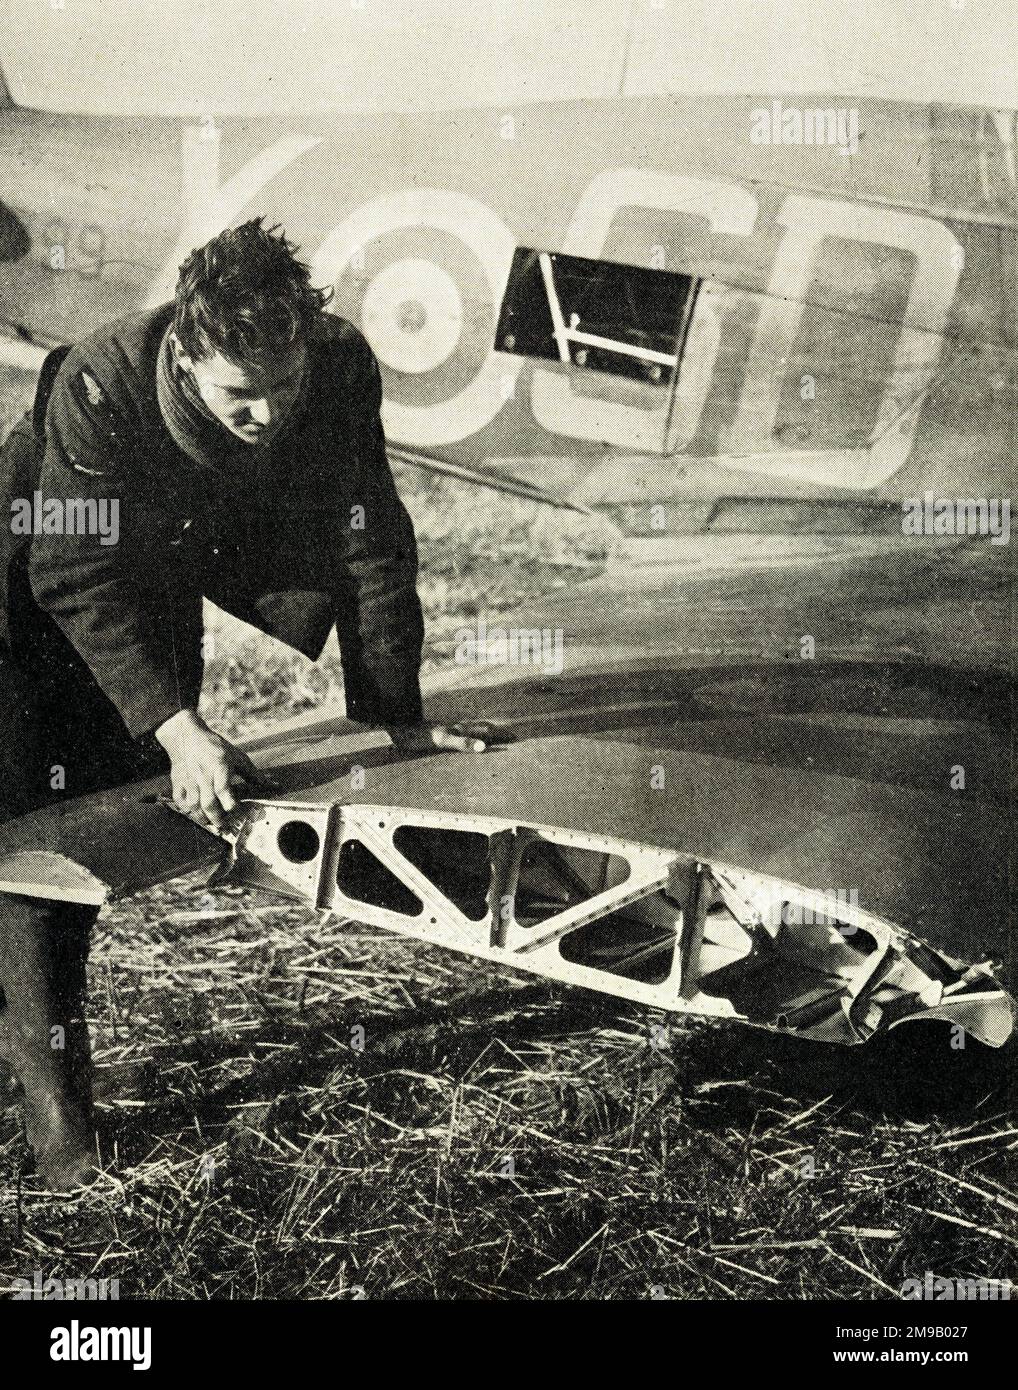 Royal Air Force Pilot Officer K.W. MacKenzie, DFC, inspecting wing of his Hurricane, WW2. Stock Photo